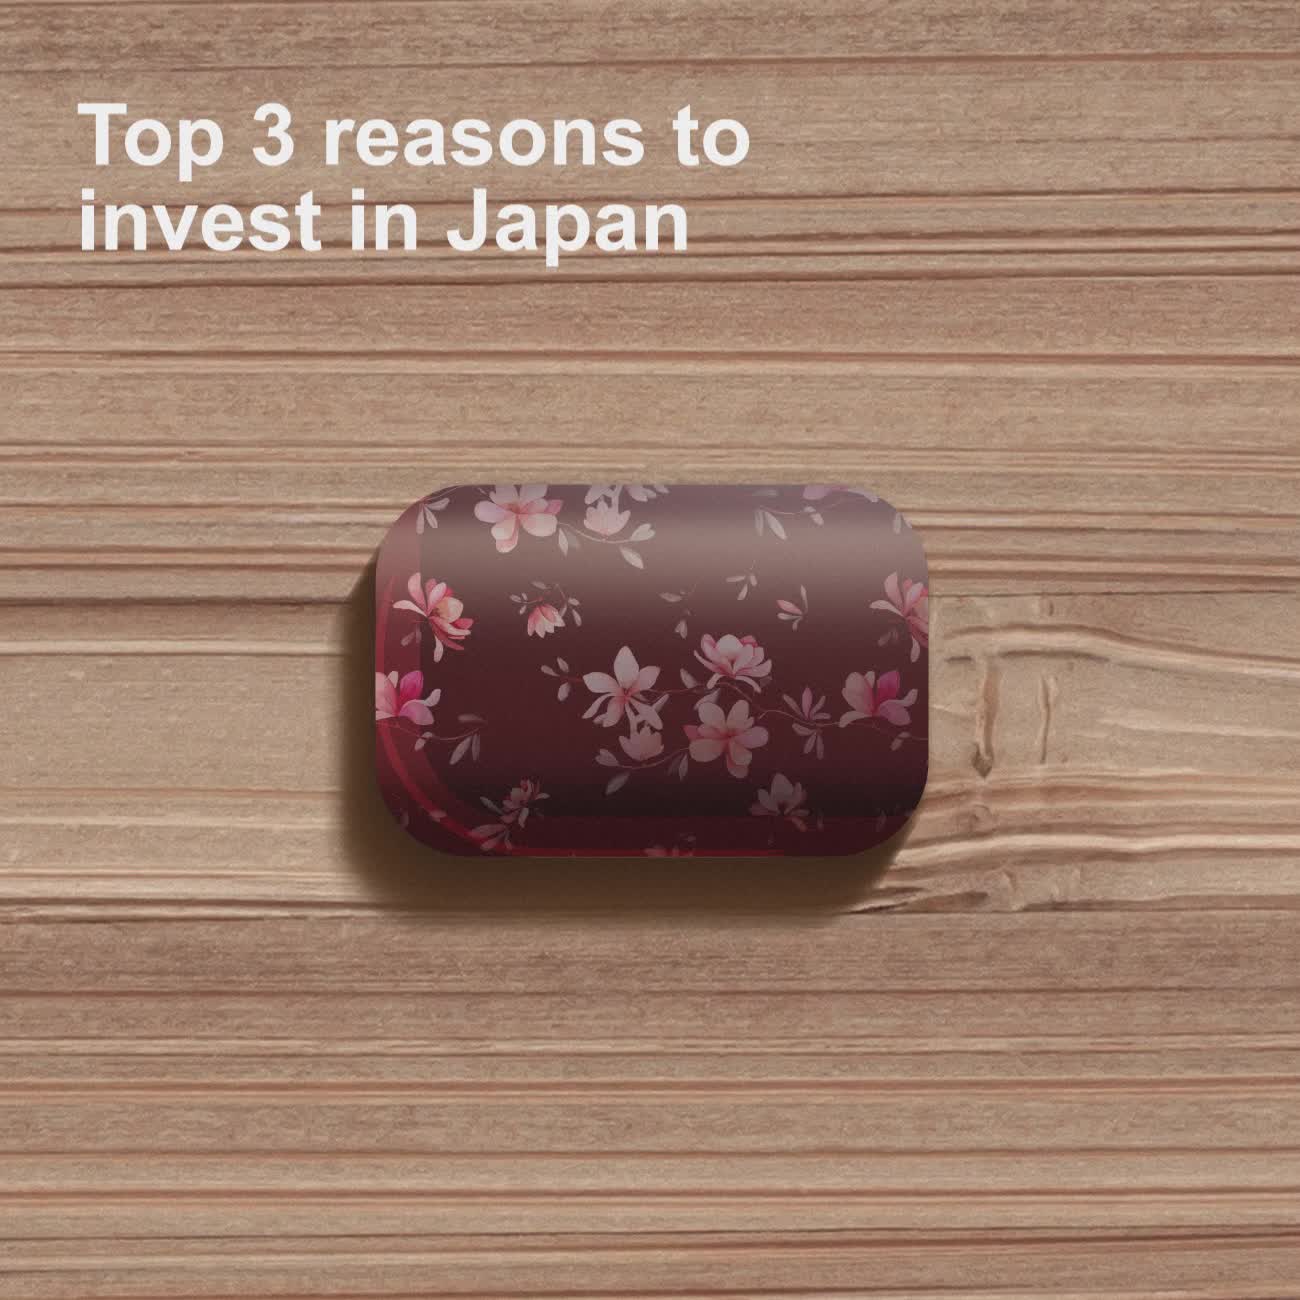 Why invest in Japan?